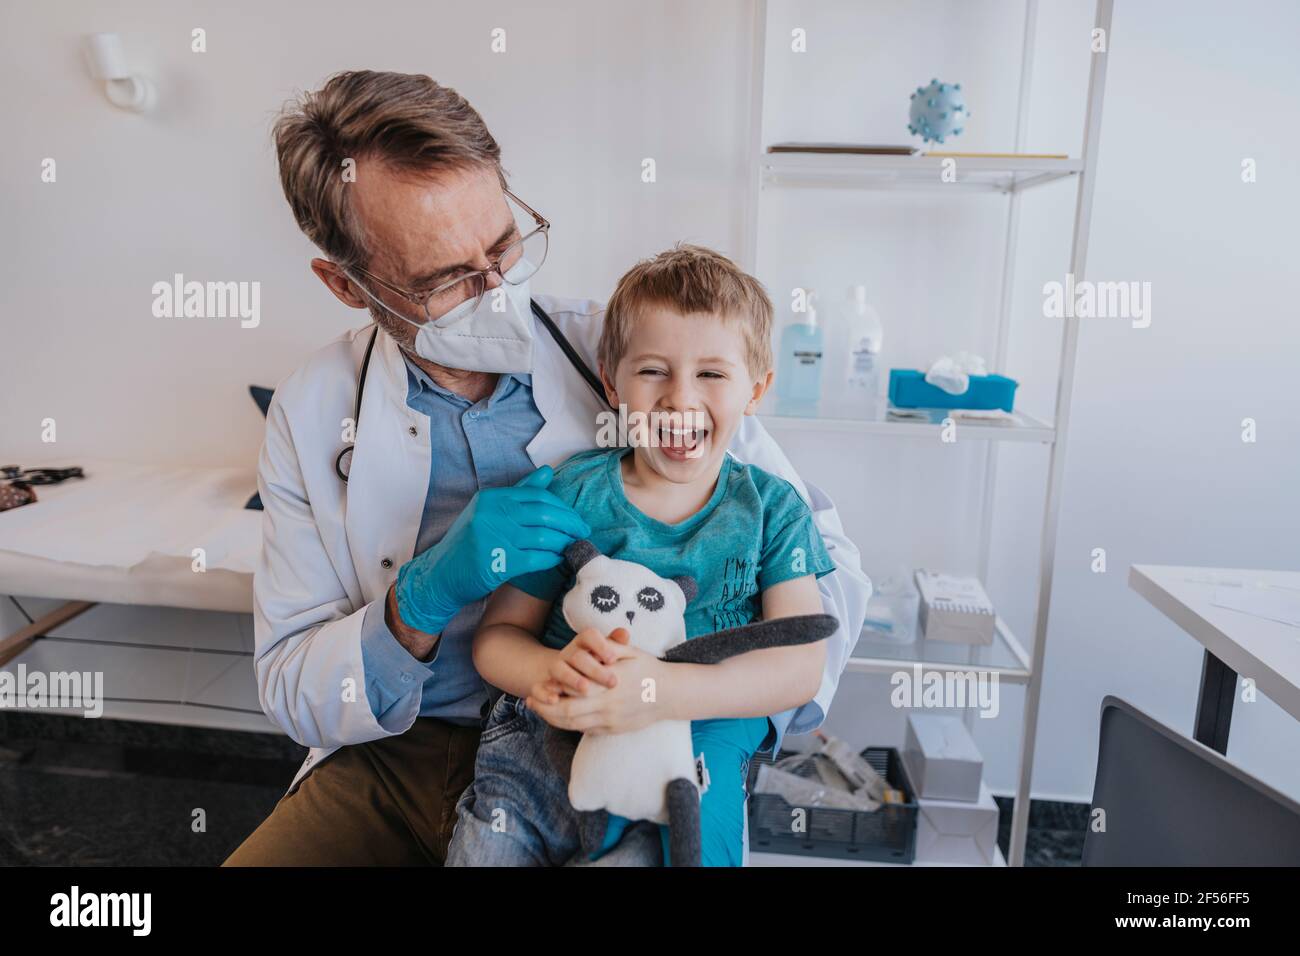 Male pediatrician looking at cheerful boy with toy while sitting at medical examination room Stock Photo